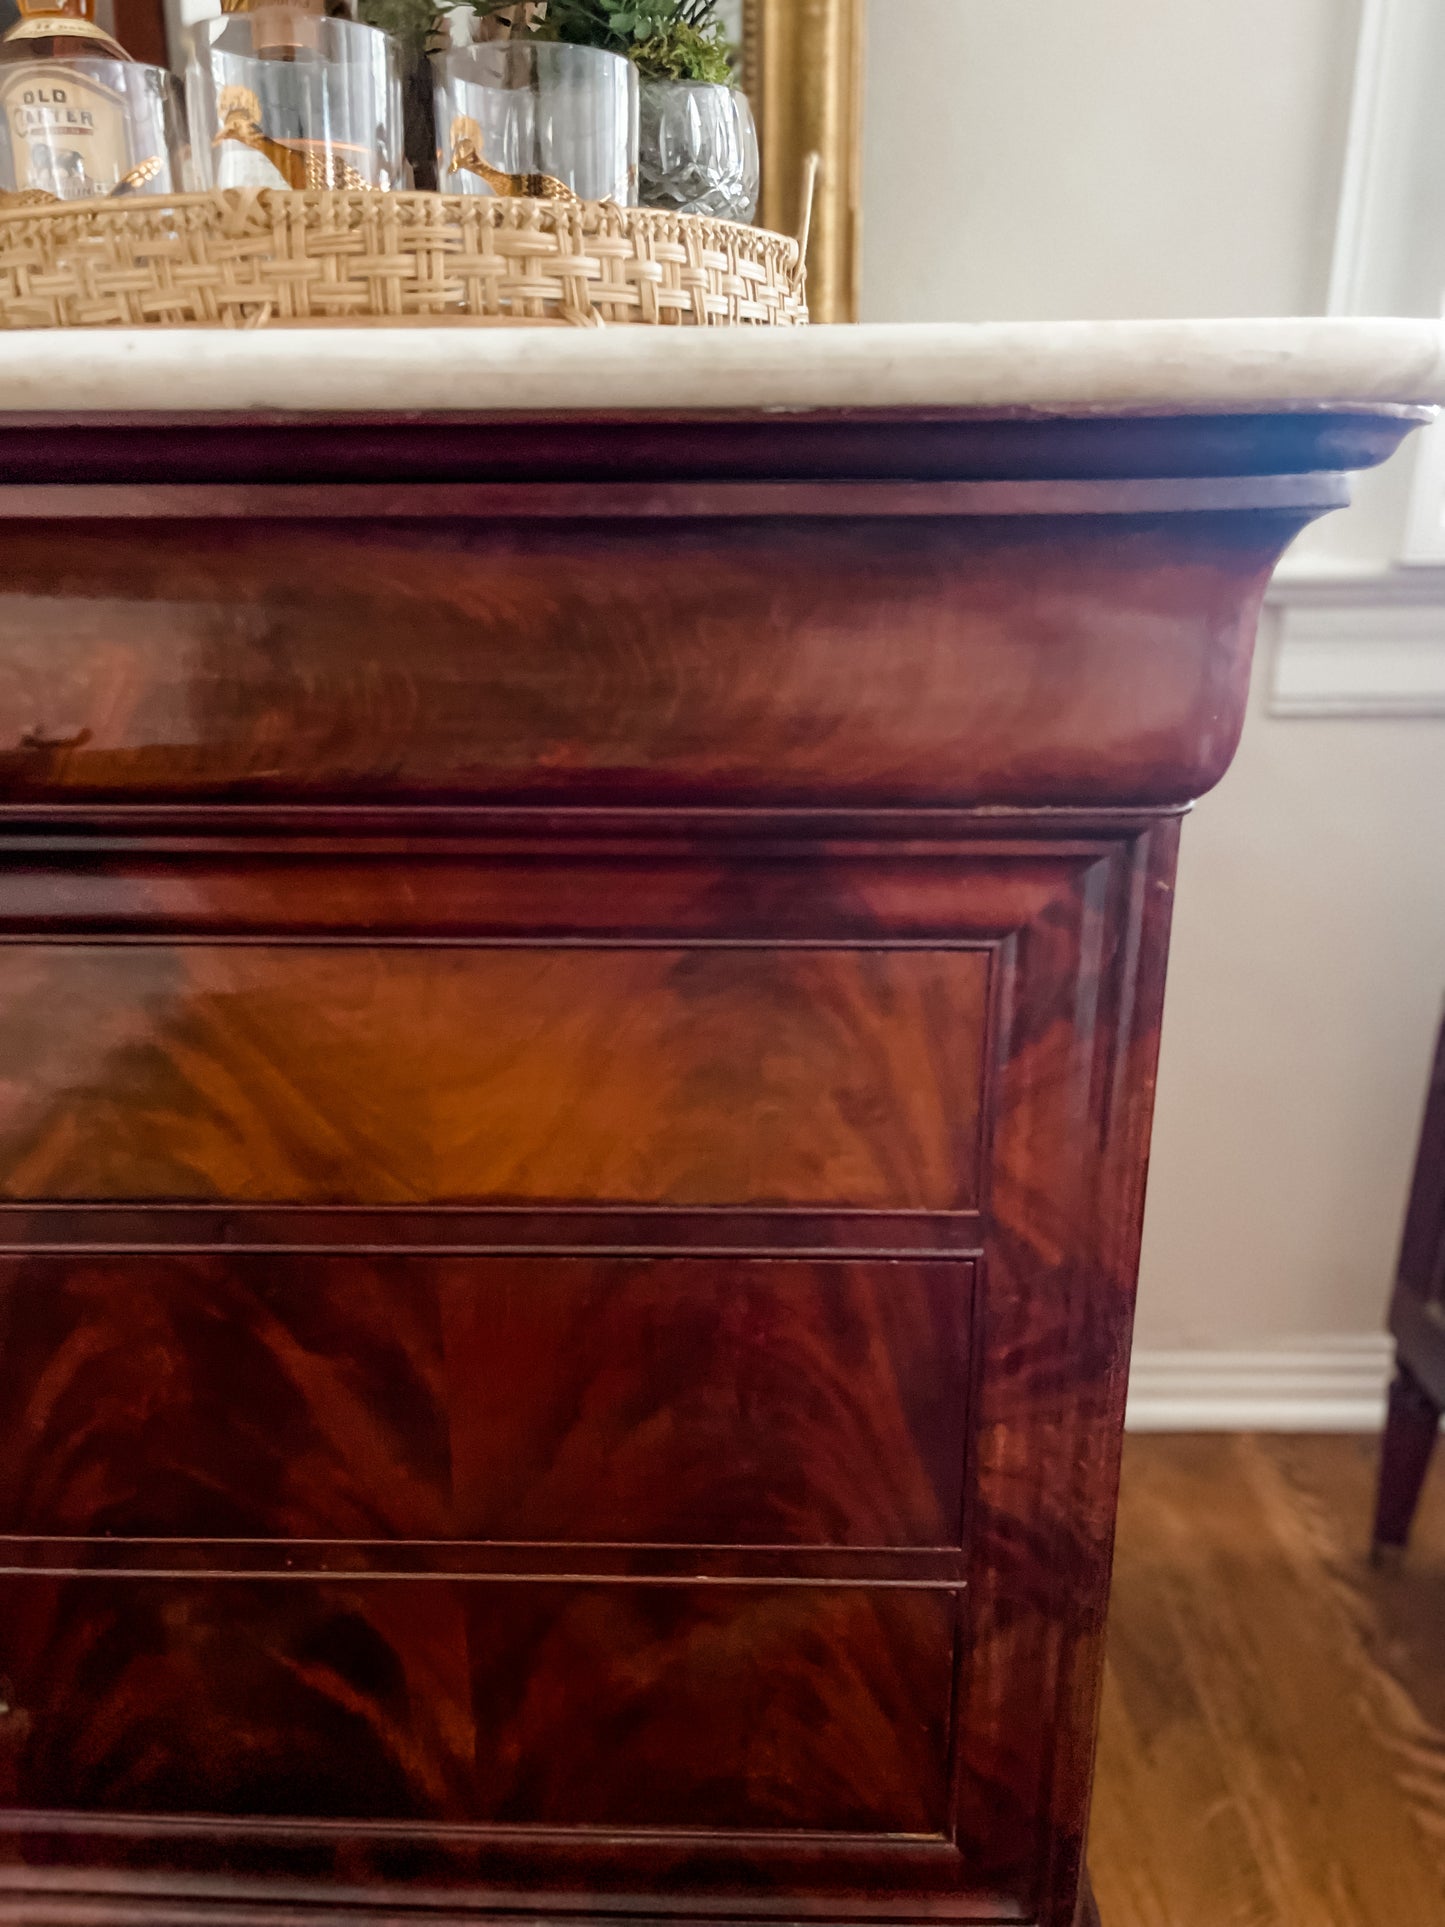 Mid 19th Century Louis Philippe White Marble Top Commode